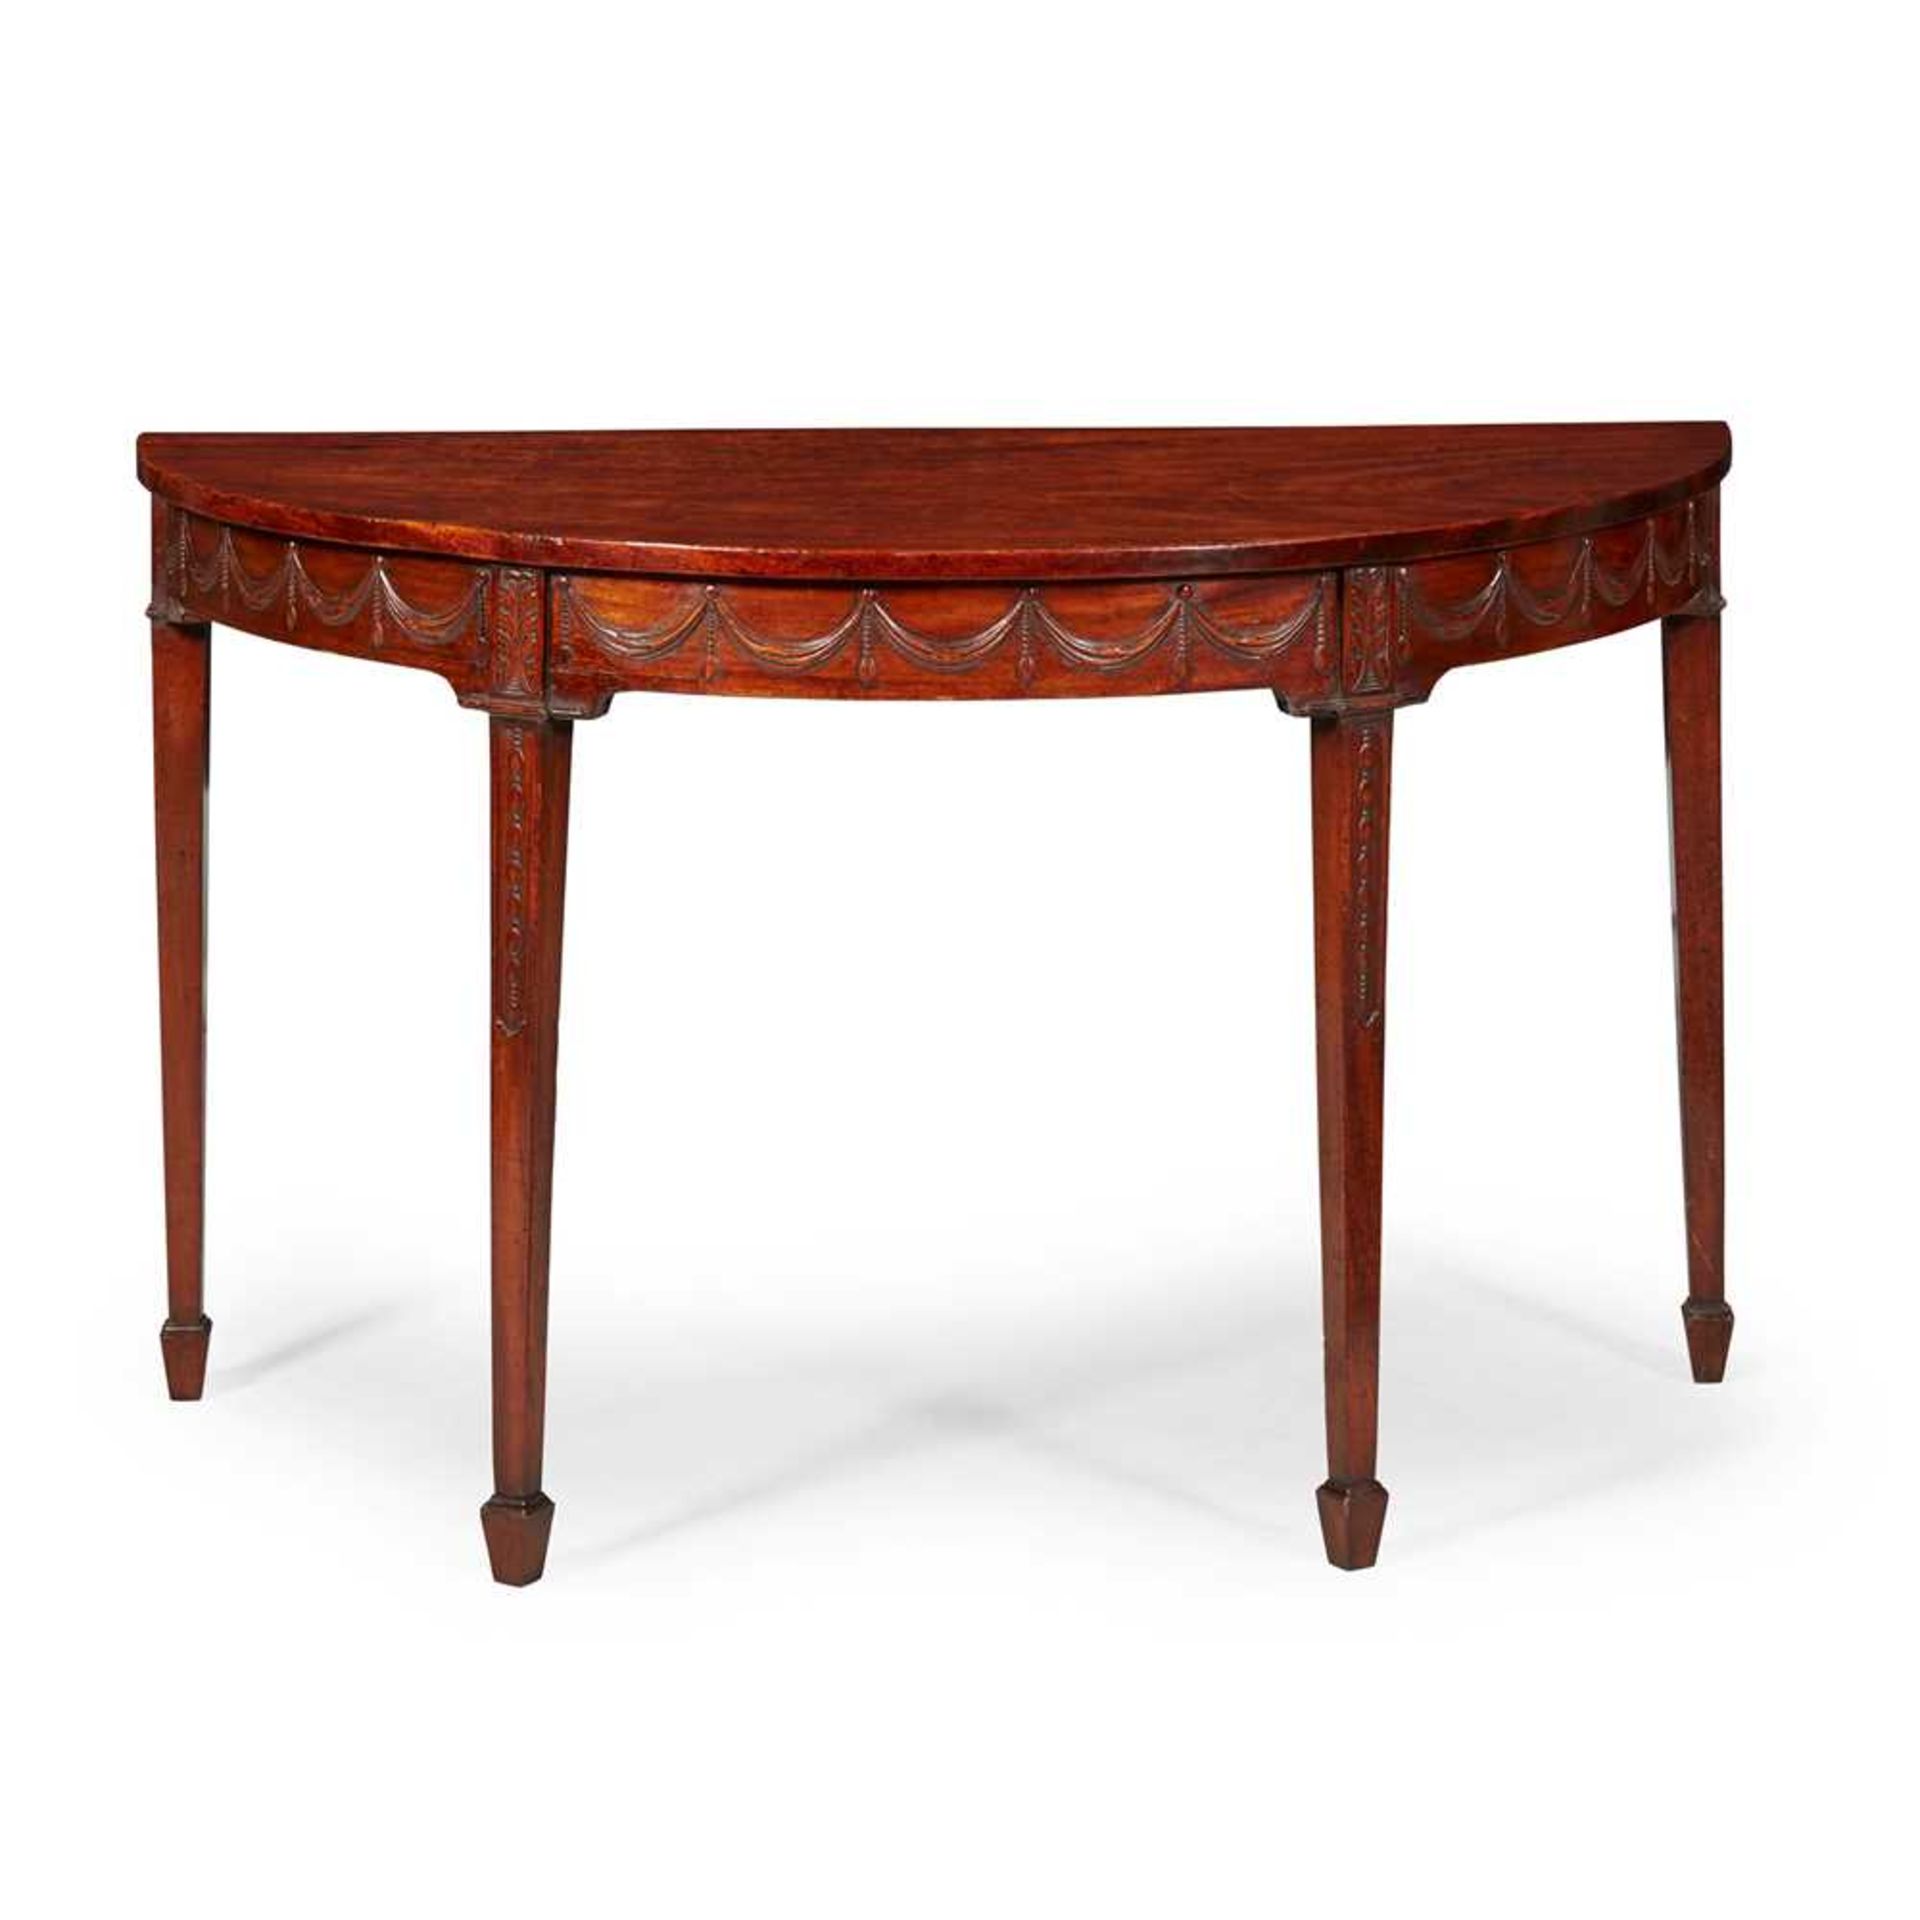 PAIR OF GEORGE III MAHOGANY DEMILUNE SIDE TABLES LATE 18TH CENTURY - Image 2 of 2